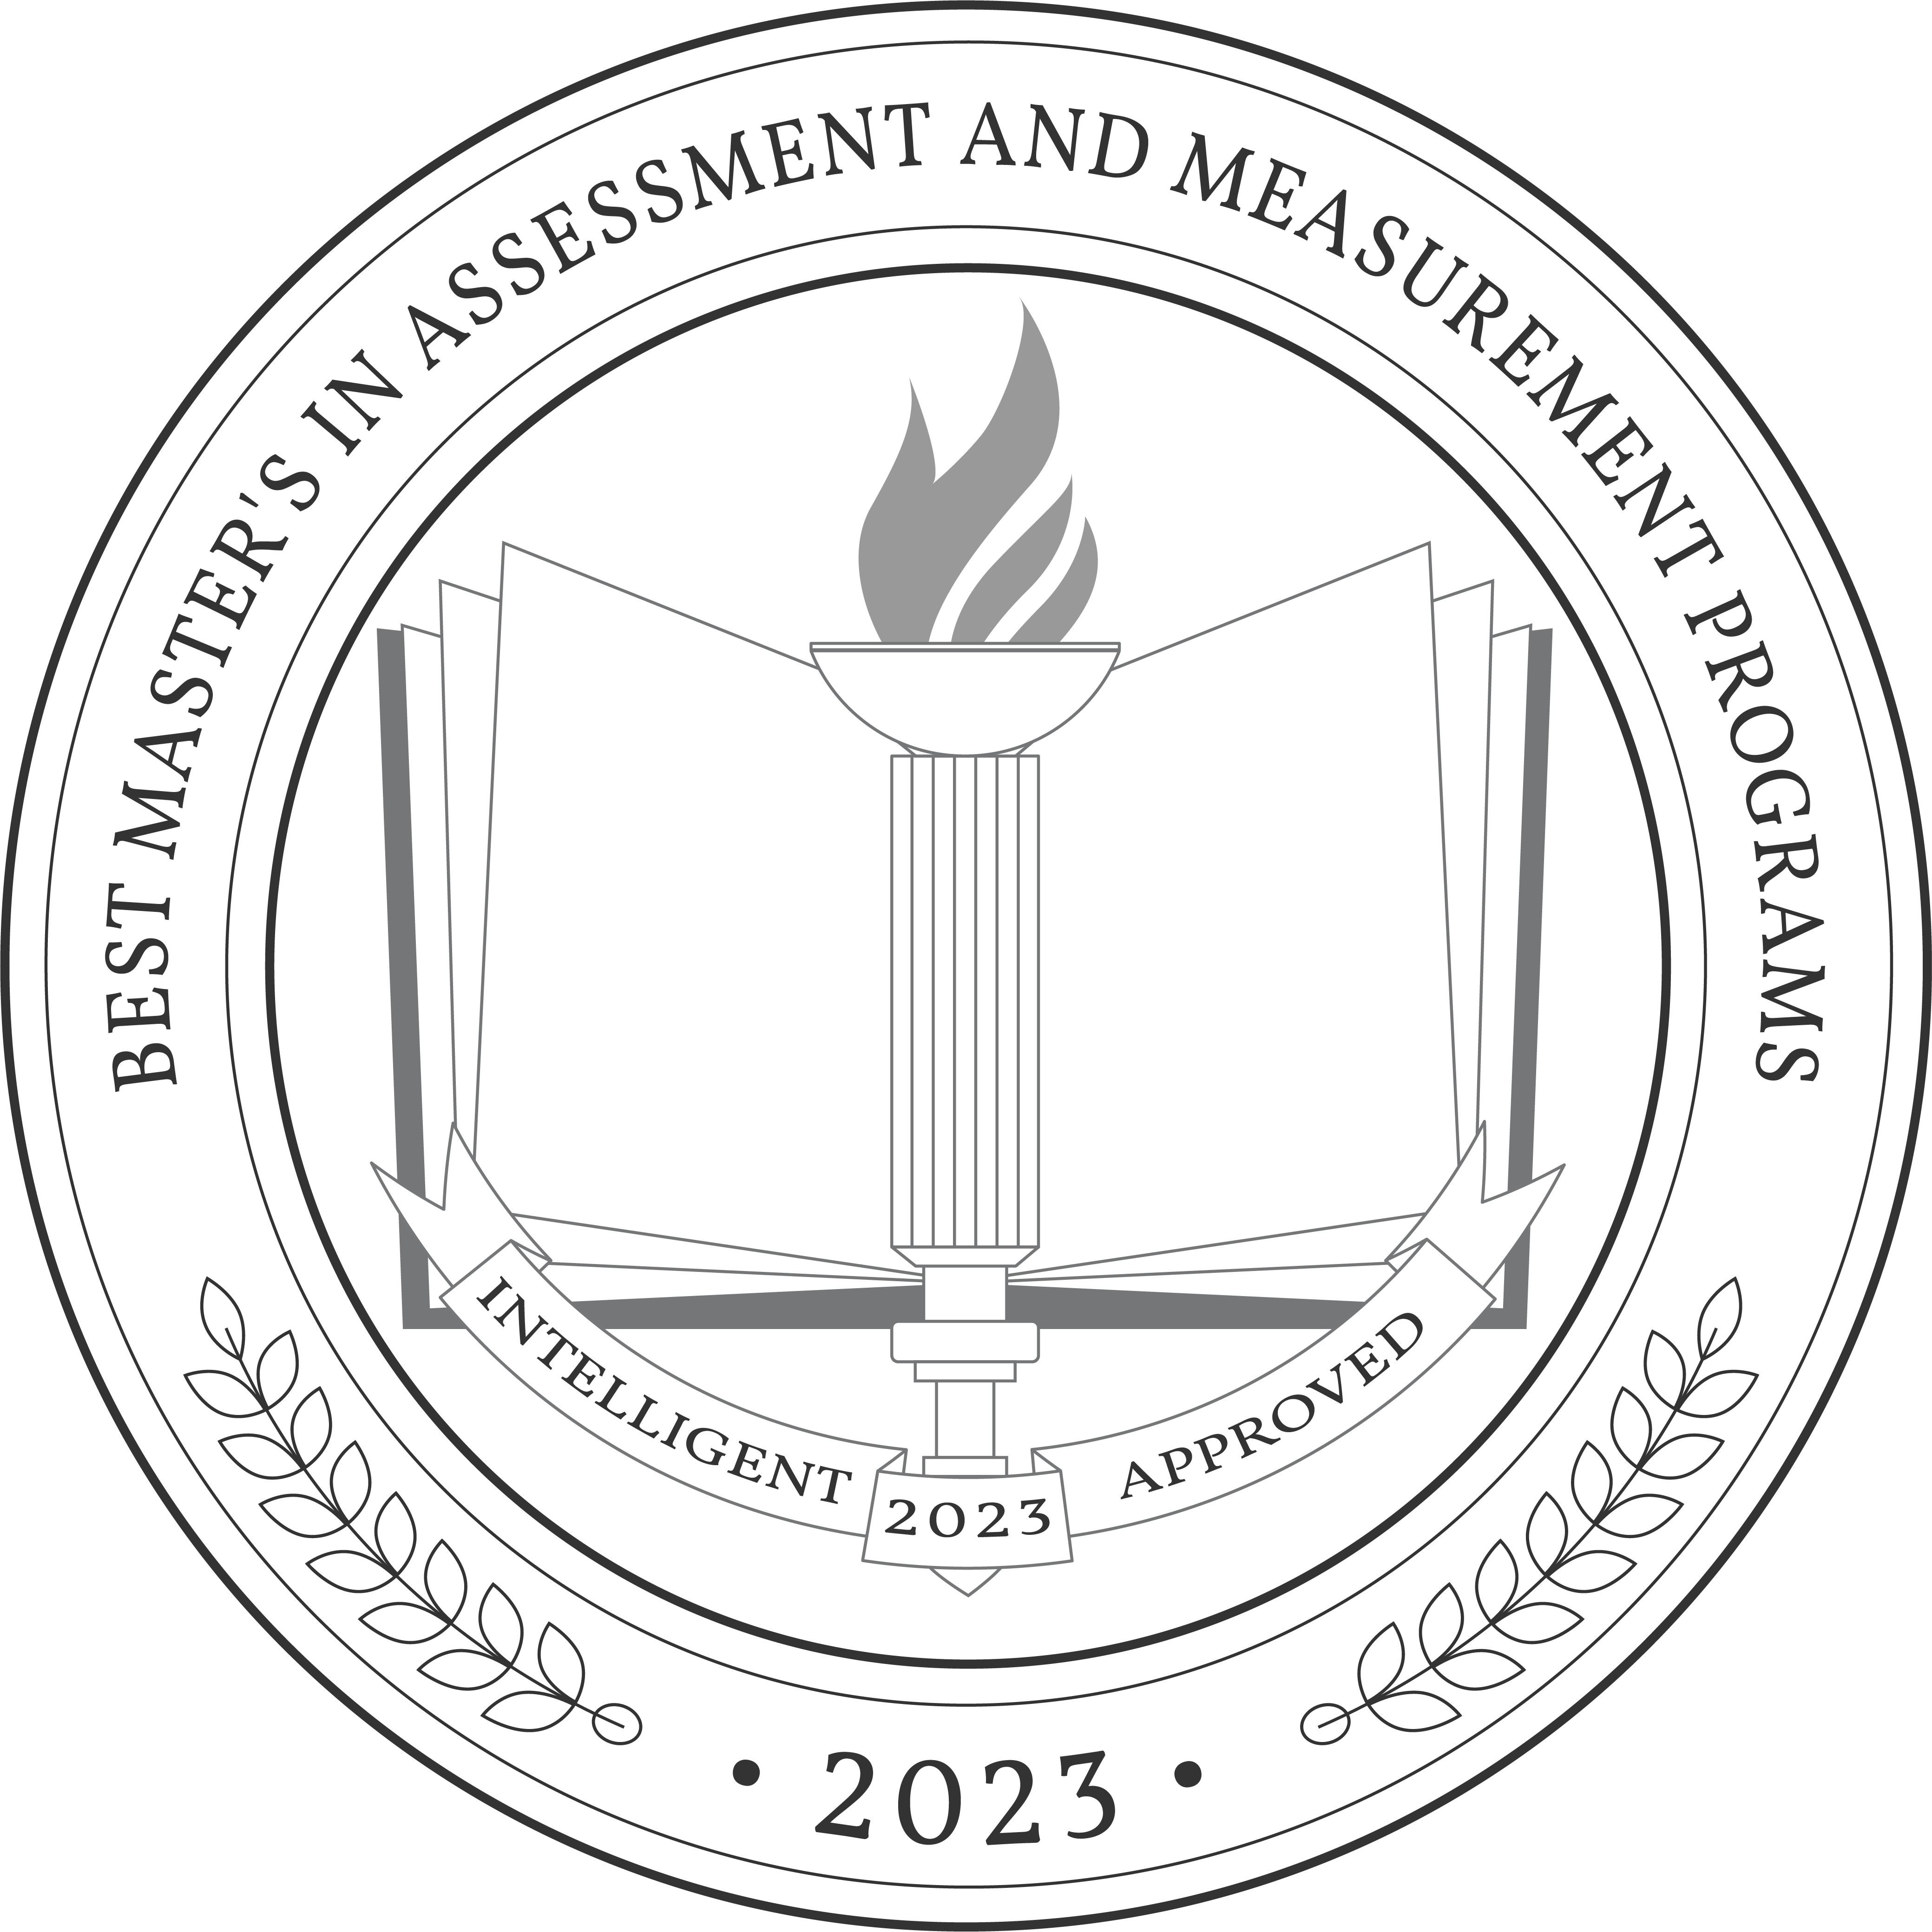 Best Master's in Assessment And Measurement Programs badge